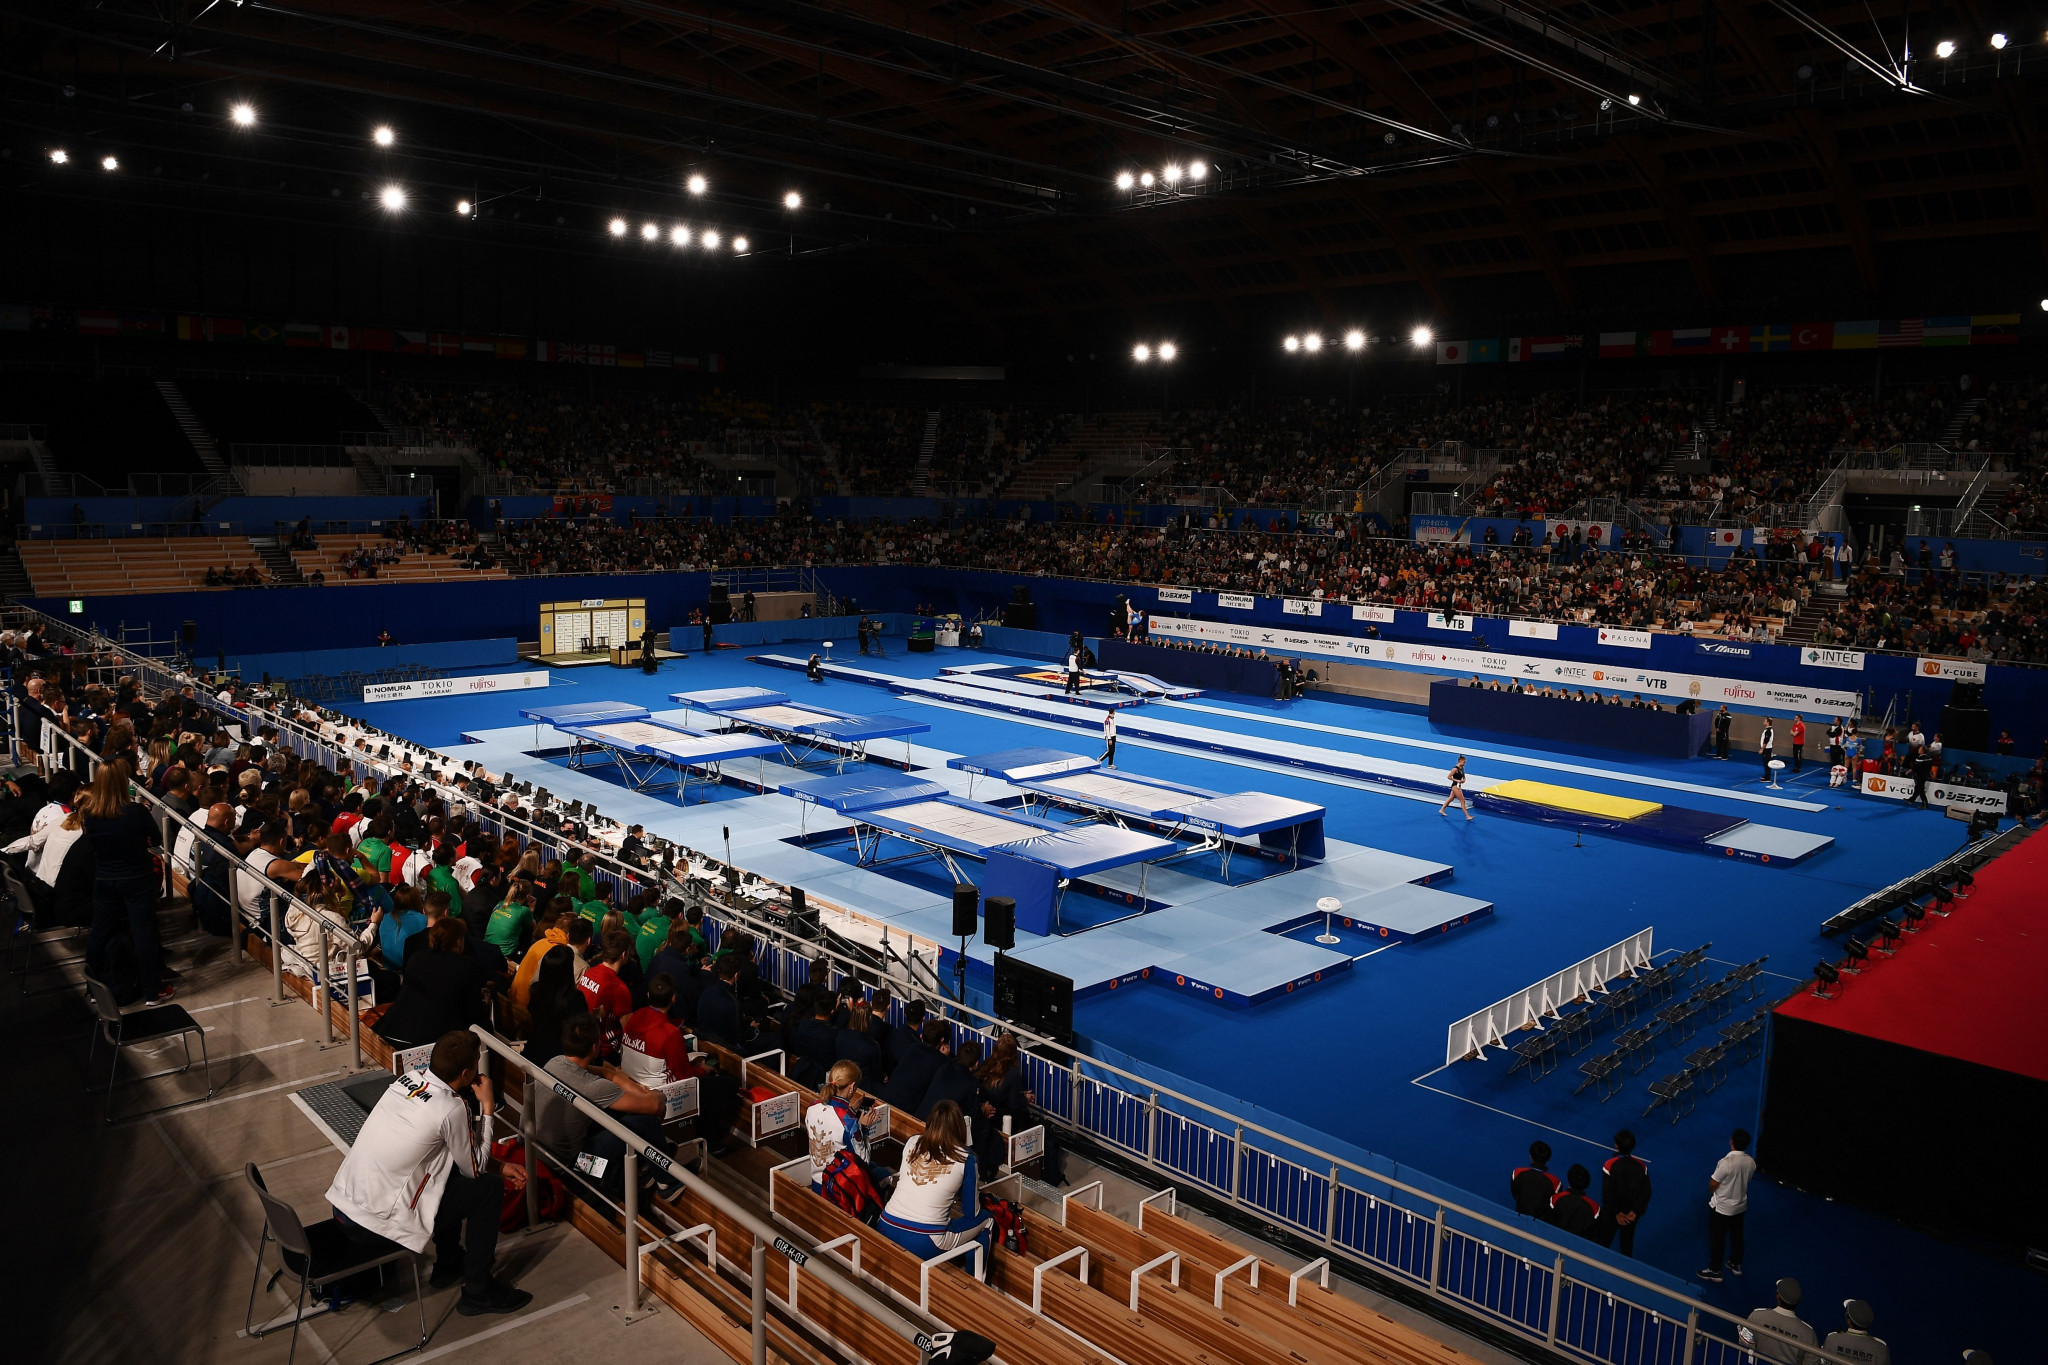 The FIG has published revised qualification criteria for Tokyo 2020 ©Getty Images